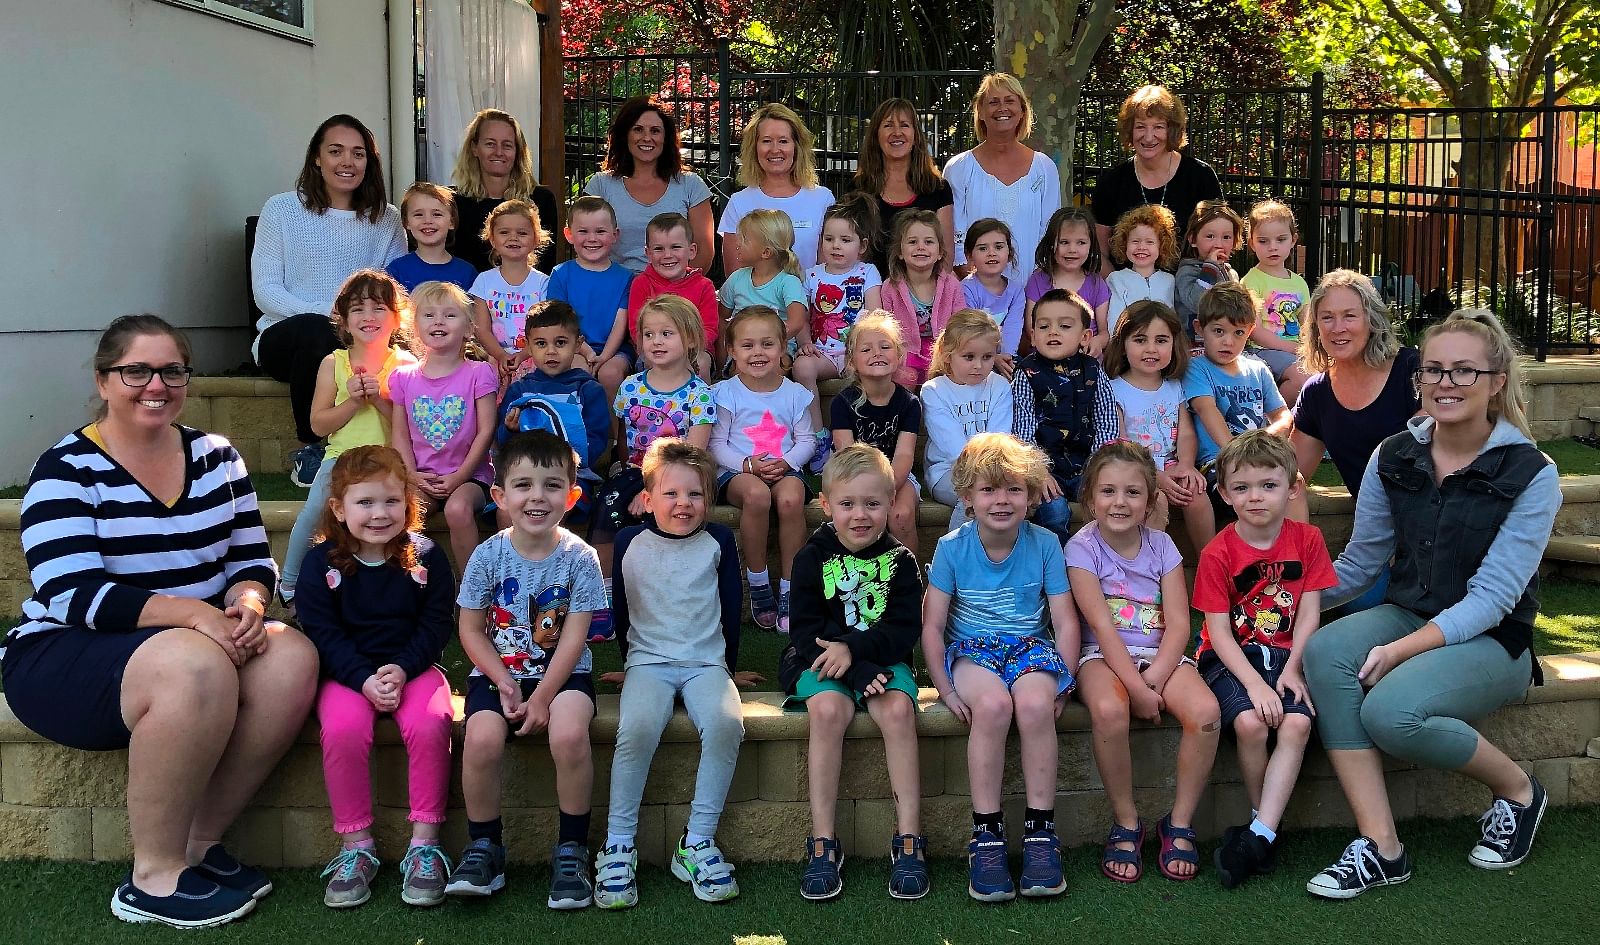 The Bega Preschool's Thursday Magpies and Tadpoles classes are looking forward to an exciting year ahead.